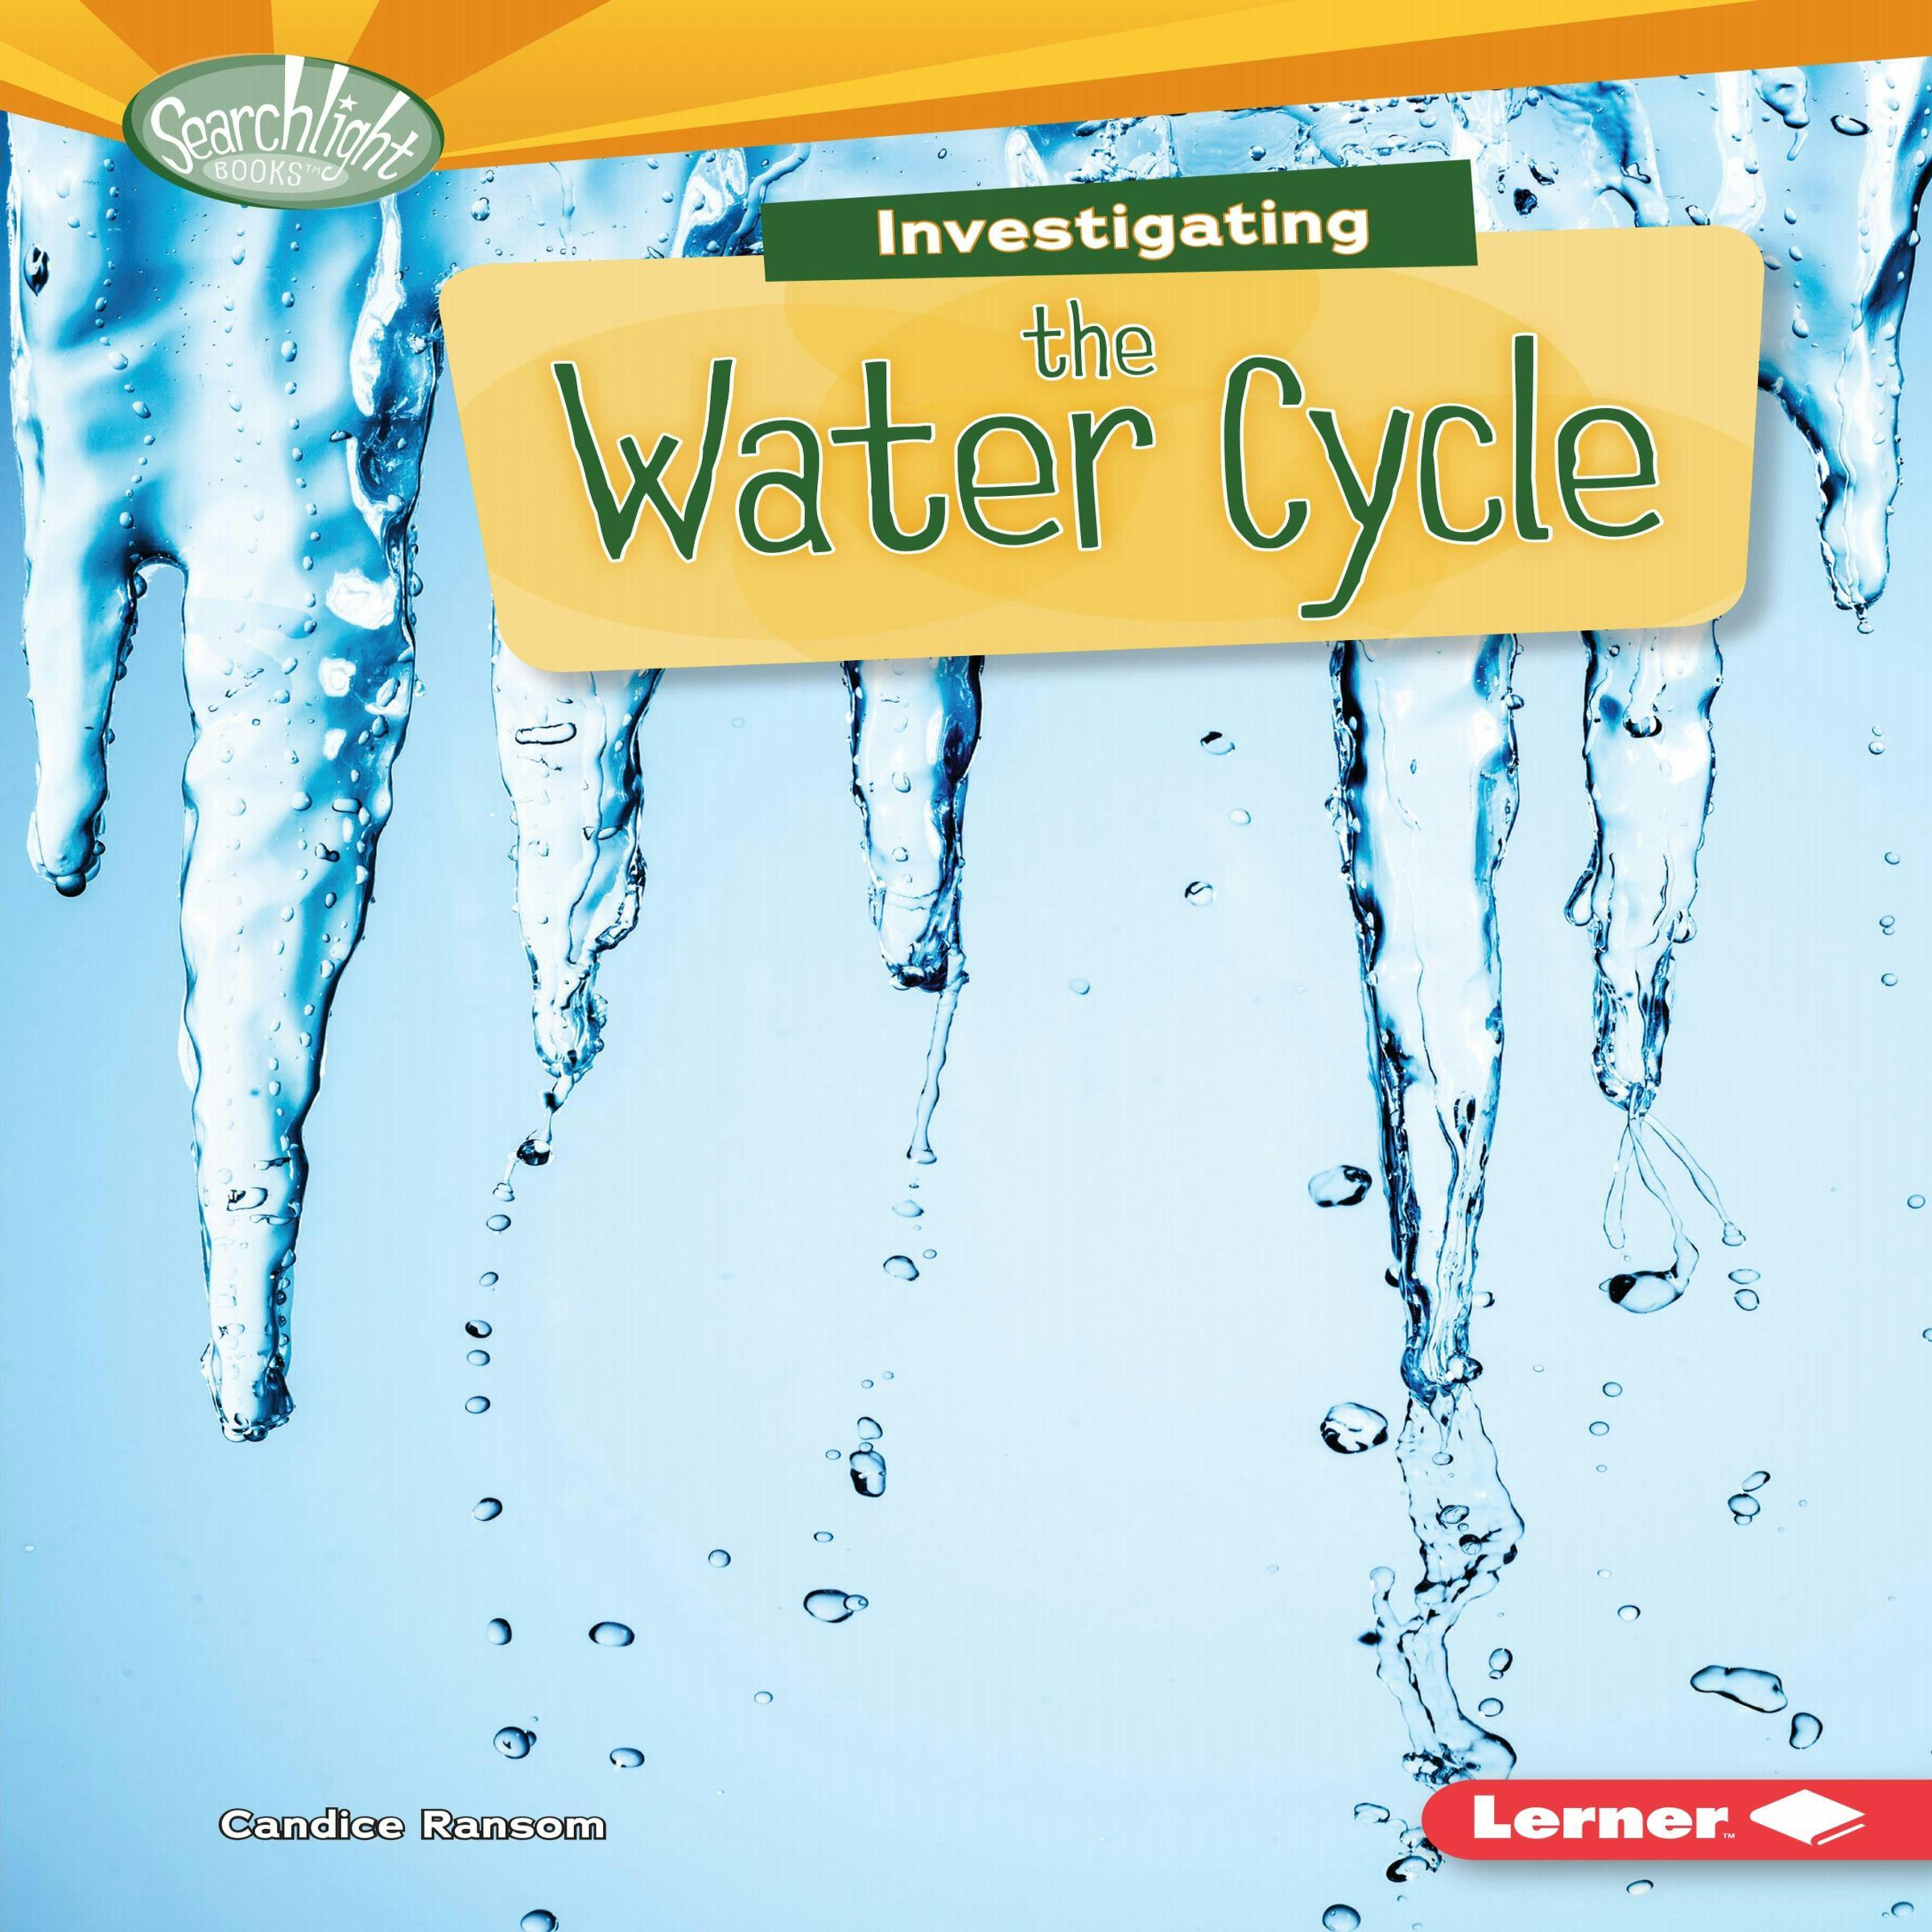 Investigating the Water Cycle - undefined